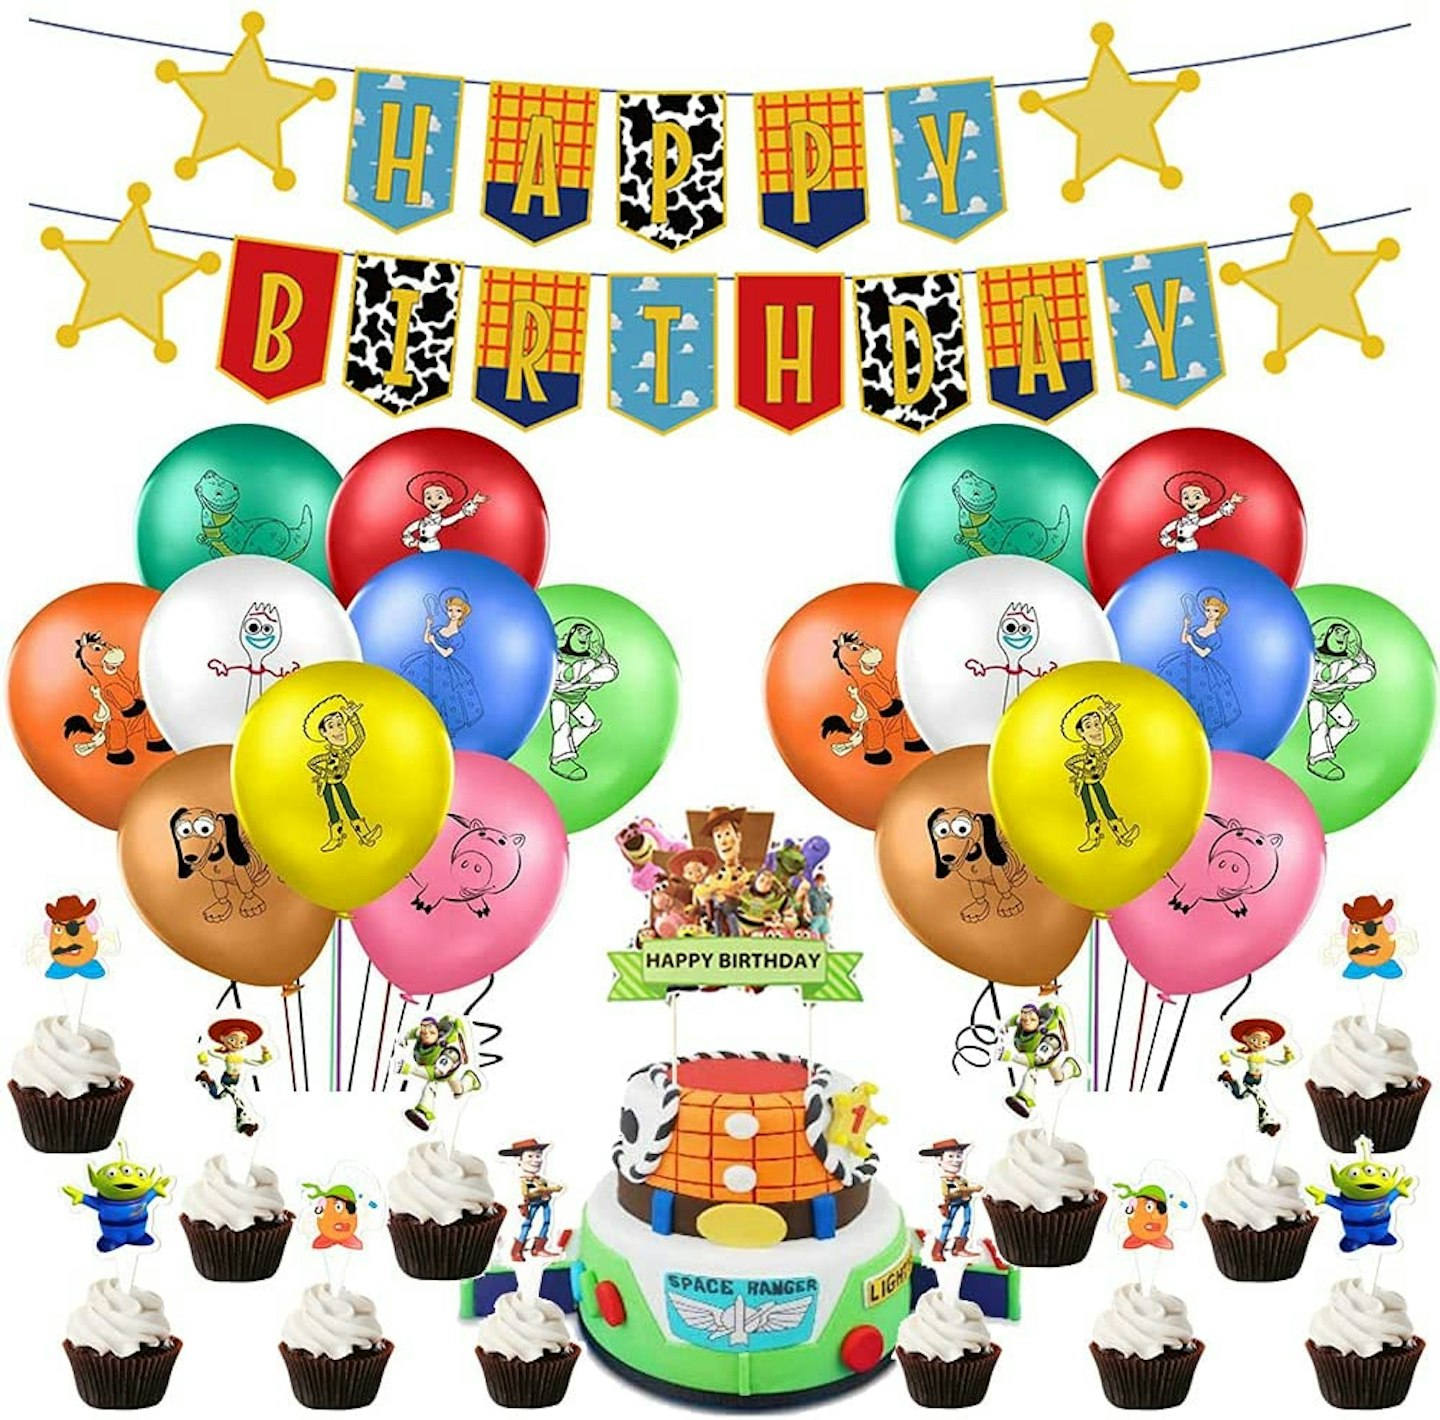 Toy Story Birthday Party Supplies